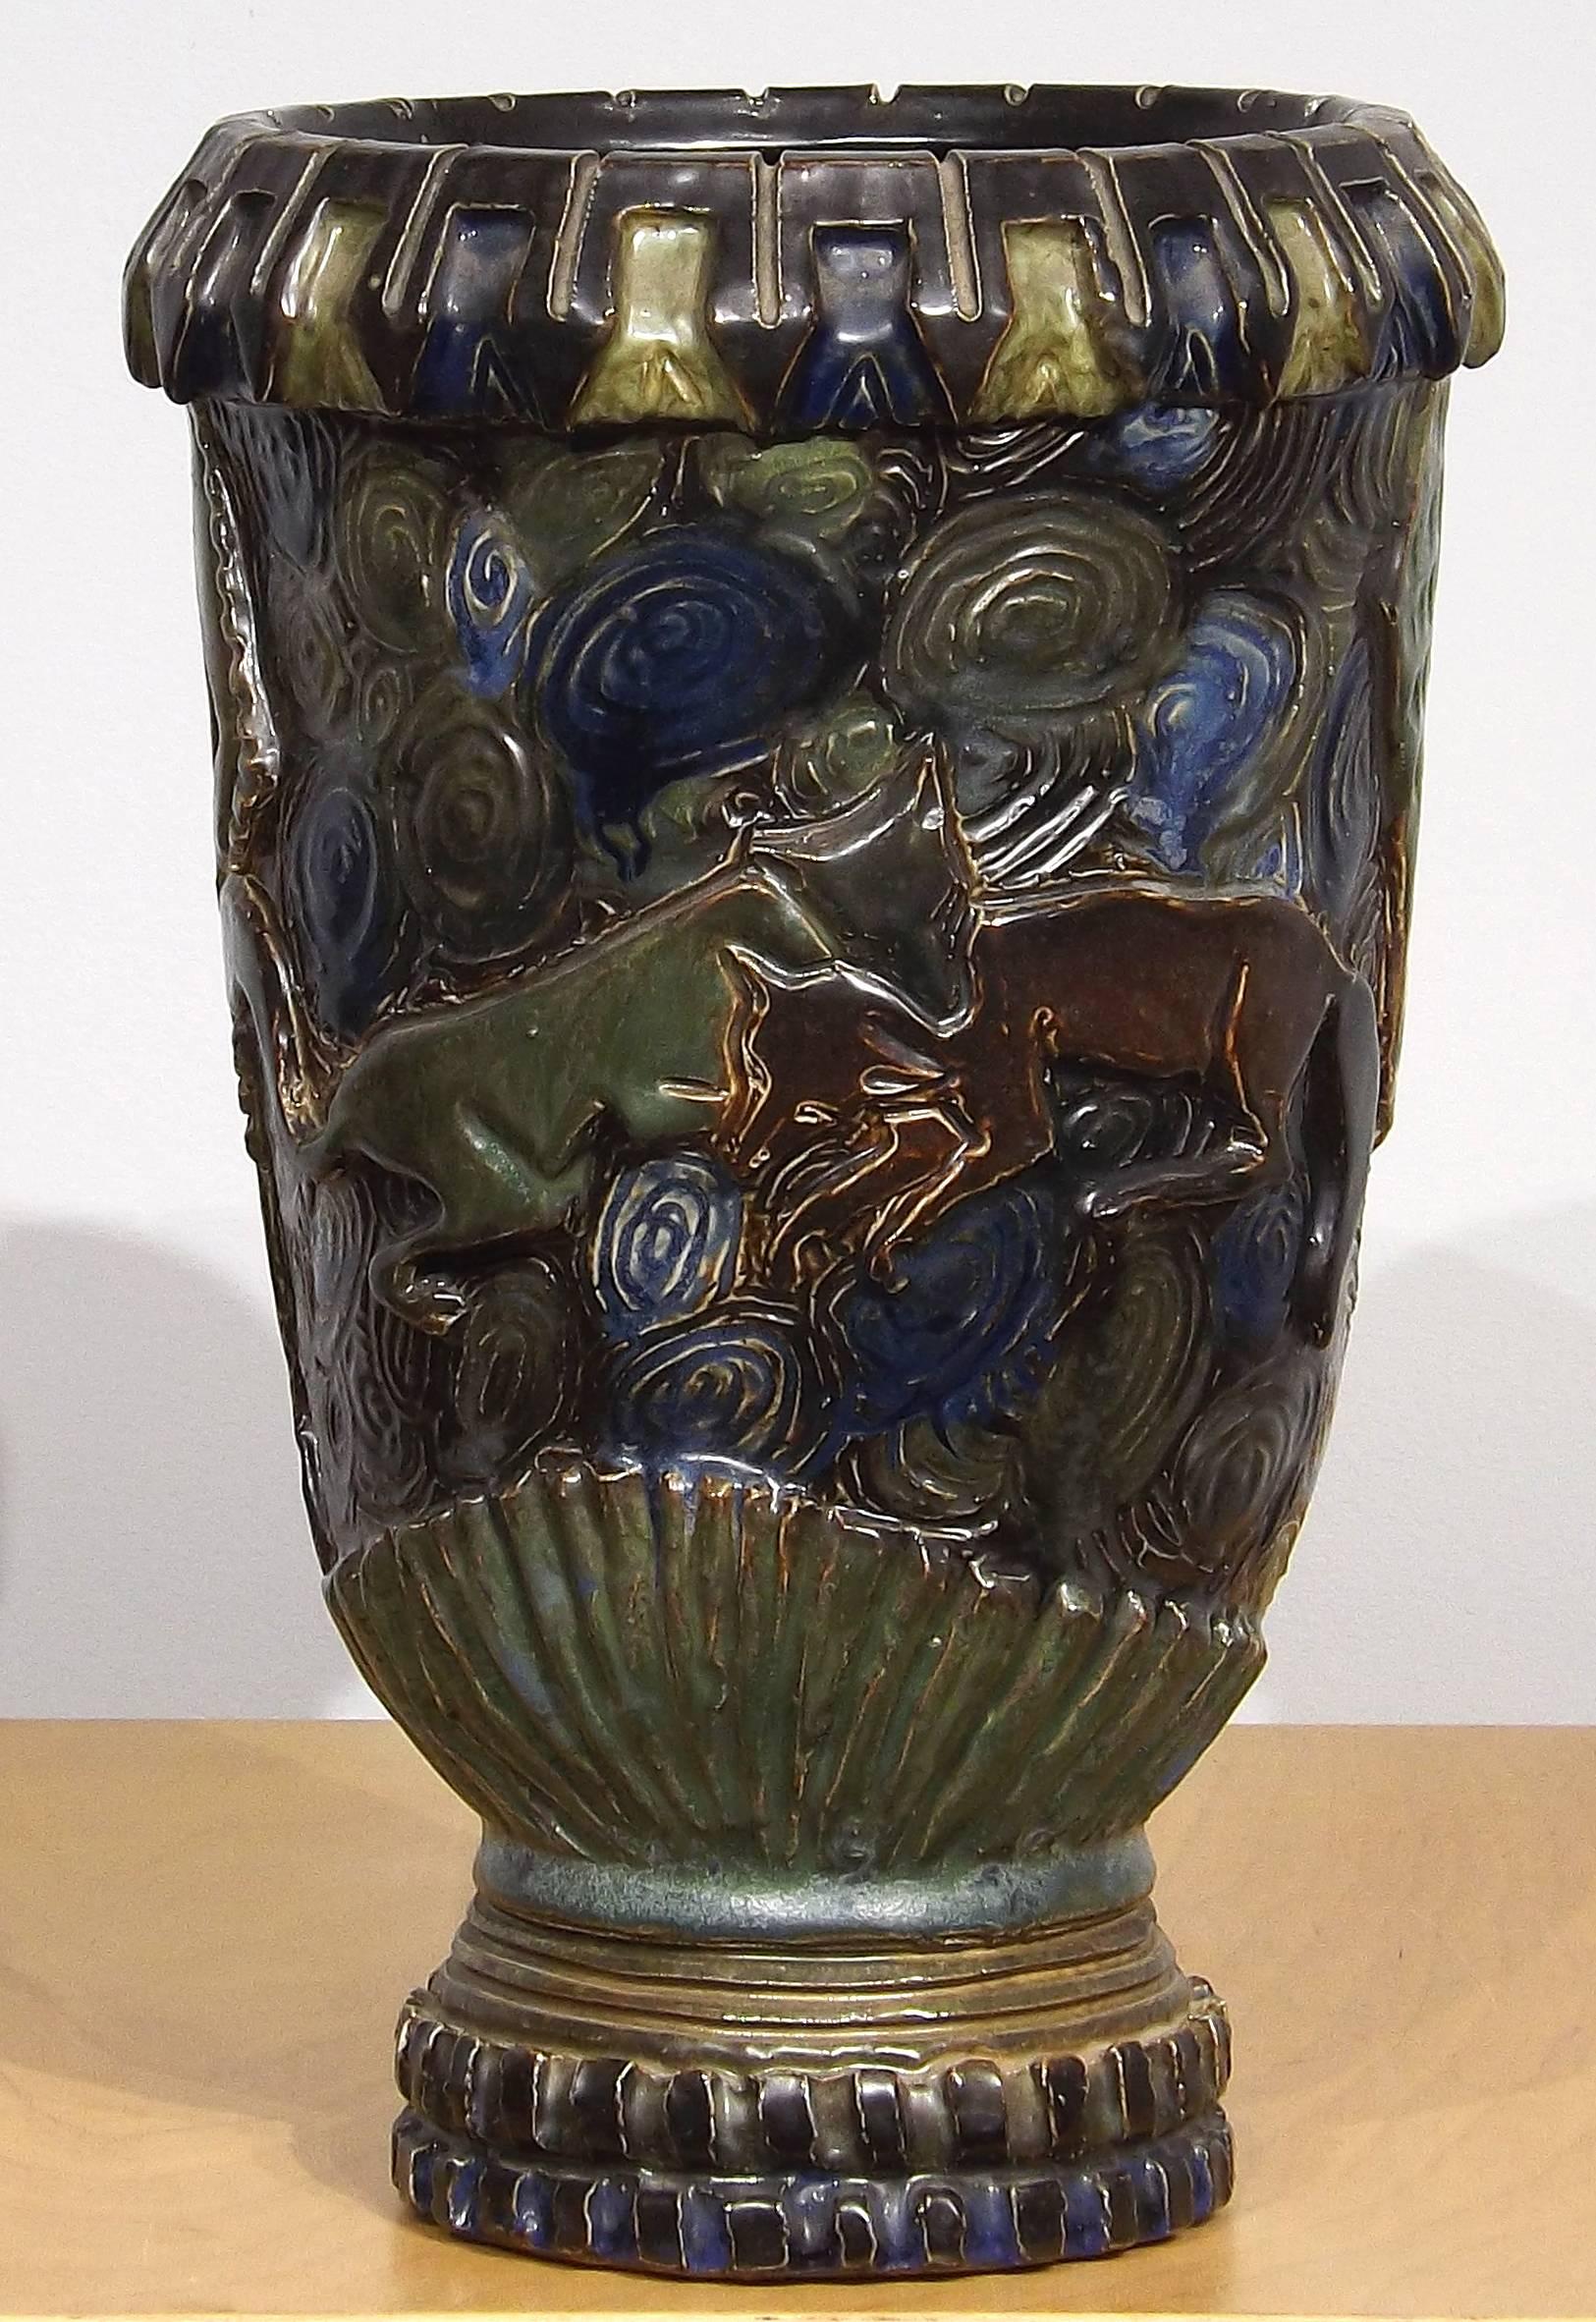 A handsome, almost medieval looking with a modernist feel, decorative vase with two young foxes playing while their mother looks on. Incised 'Guerin Unique' on the bottom. Impressive piece of art pottery.